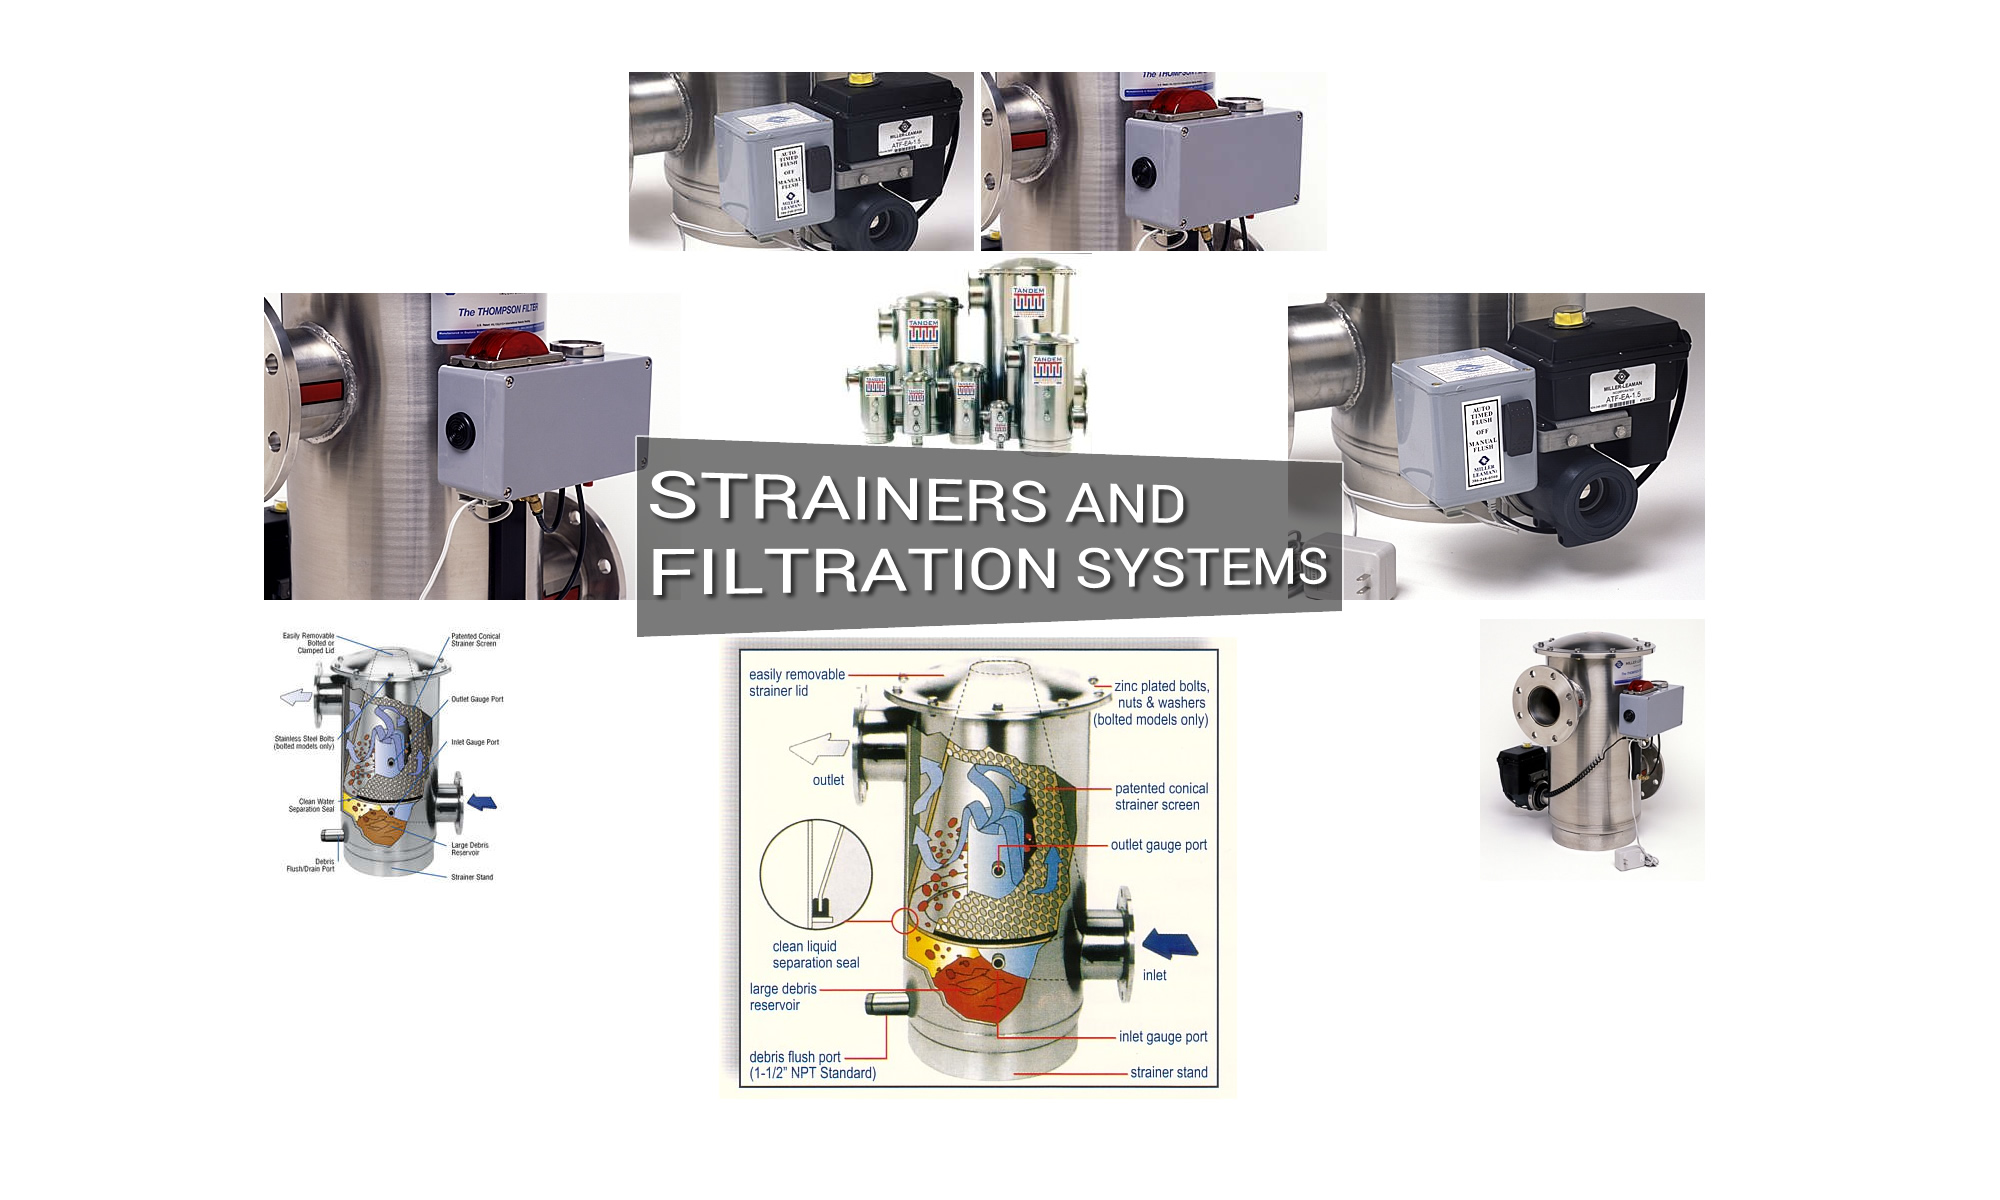 Strainers and Filtration Systems